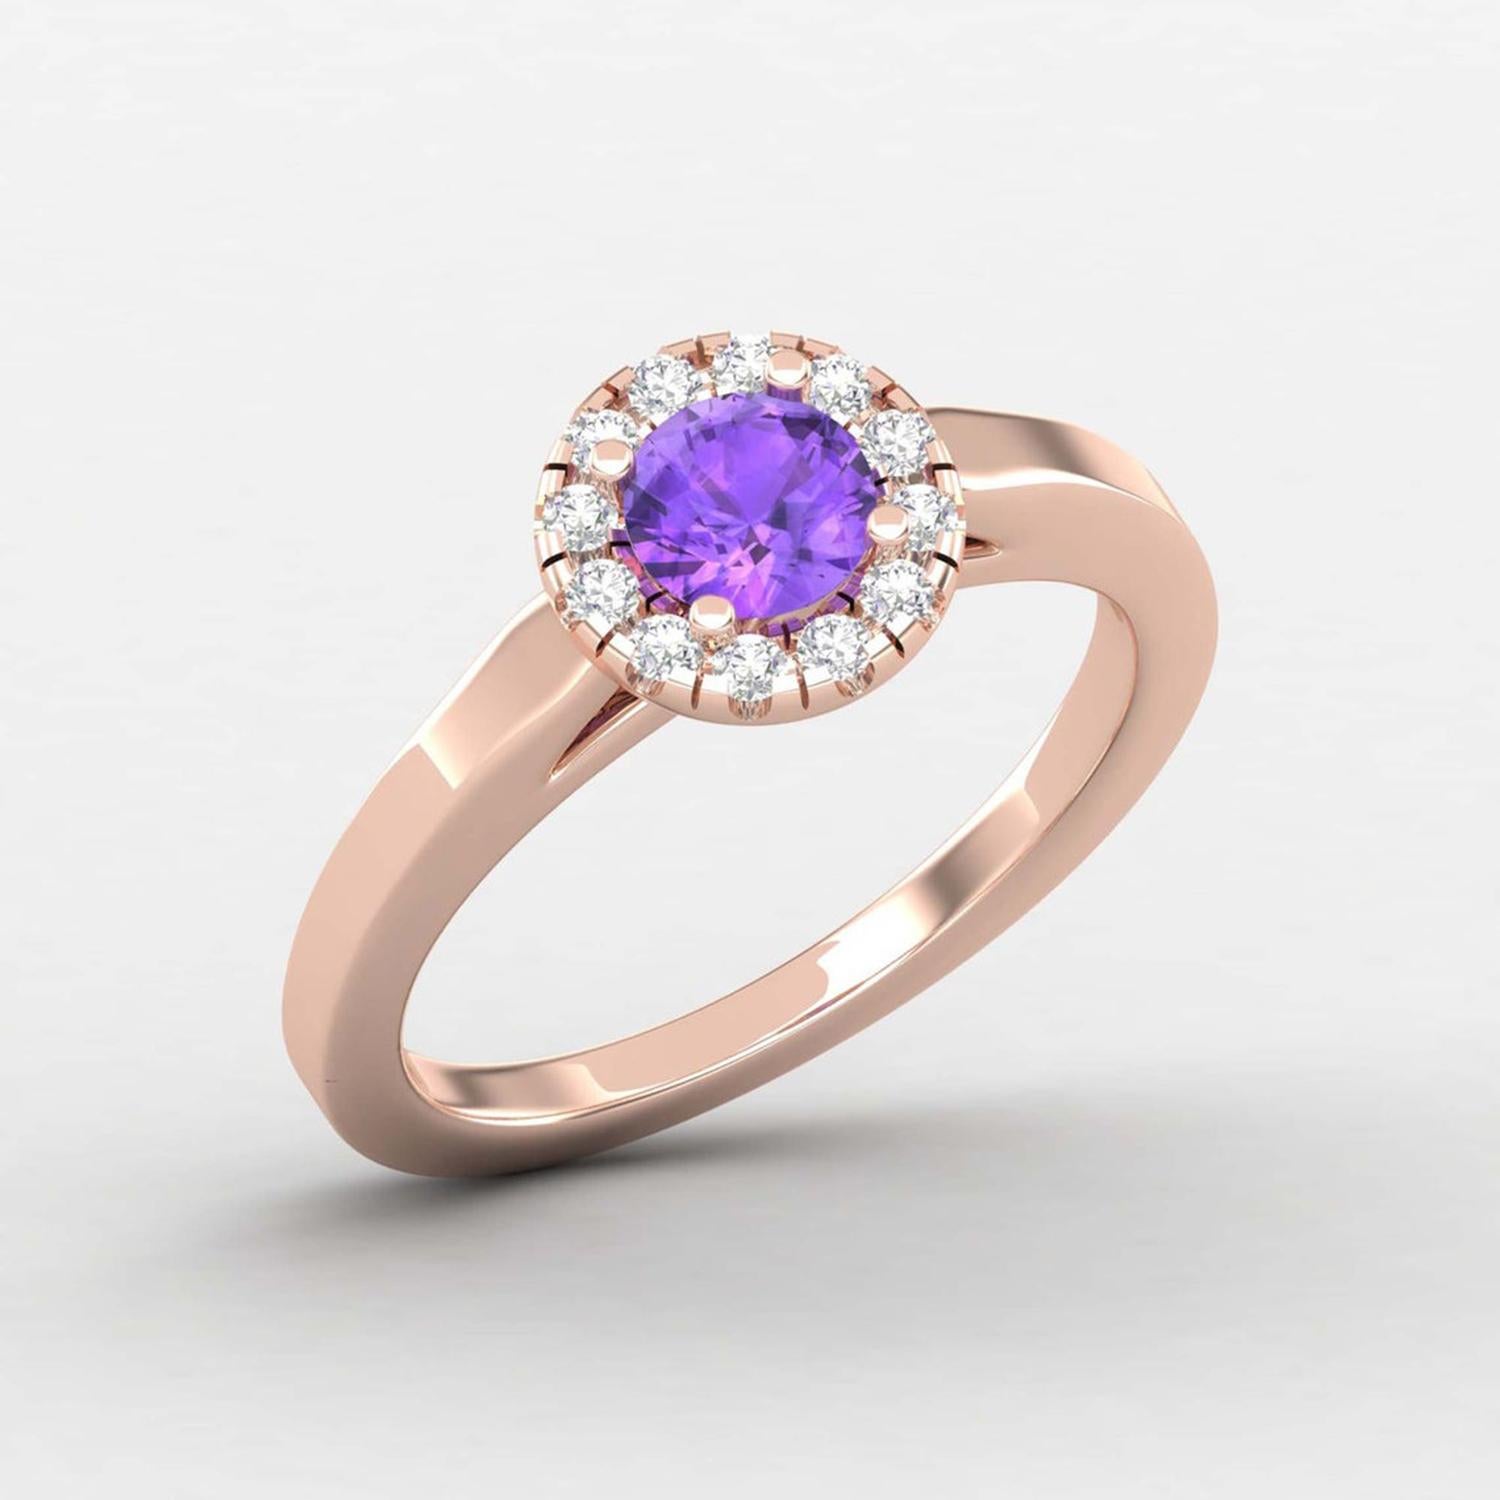 Modern 14 K Gold Round Amethyst Ring / Round Diamond Ring / Solitaire Ring For Sale